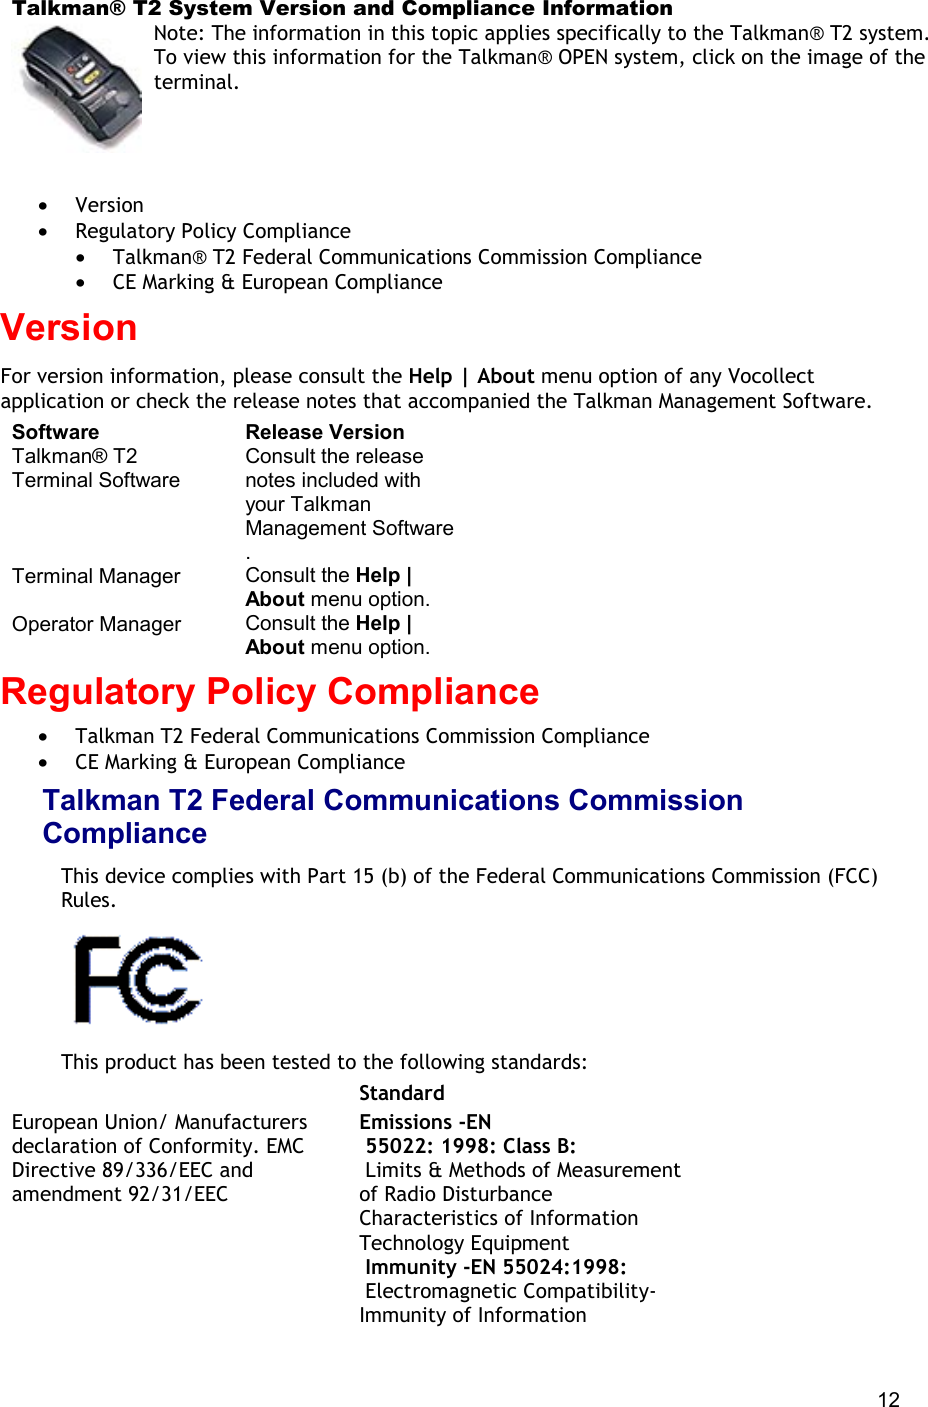  12 Talkman® T2 System Version and Compliance Information Note: The information in this topic applies specifically to the Talkman® T2 system. To view this information for the Talkman® OPEN system, click on the image of the terminal.   •  Version •  Regulatory Policy Compliance •  Talkman® T2 Federal Communications Commission Compliance •  CE Marking &amp; European Compliance Version For version information, please consult the Help | About menu option of any Vocollect application or check the release notes that accompanied the Talkman Management Software. Software Release Version Talkman® T2 Terminal Software Consult the release notes included with your Talkman Management Software . Terminal Manager Consult the Help | About menu option. Operator Manager Consult the Help | About menu option. Regulatory Policy Compliance •  Talkman T2 Federal Communications Commission Compliance •  CE Marking &amp; European Compliance Talkman T2 Federal Communications Commission Compliance  This device complies with Part 15 (b) of the Federal Communications Commission (FCC) Rules.   This product has been tested to the following standards:   Standard European Union/ Manufacturers declaration of Conformity. EMC Directive 89/336/EEC and amendment 92/31/EEC Emissions -EN  55022: 1998: Class B:  Limits &amp; Methods of Measurement of Radio Disturbance Characteristics of Information Technology Equipment  Immunity -EN 55024:1998:  Electromagnetic Compatibility-Immunity of Information 